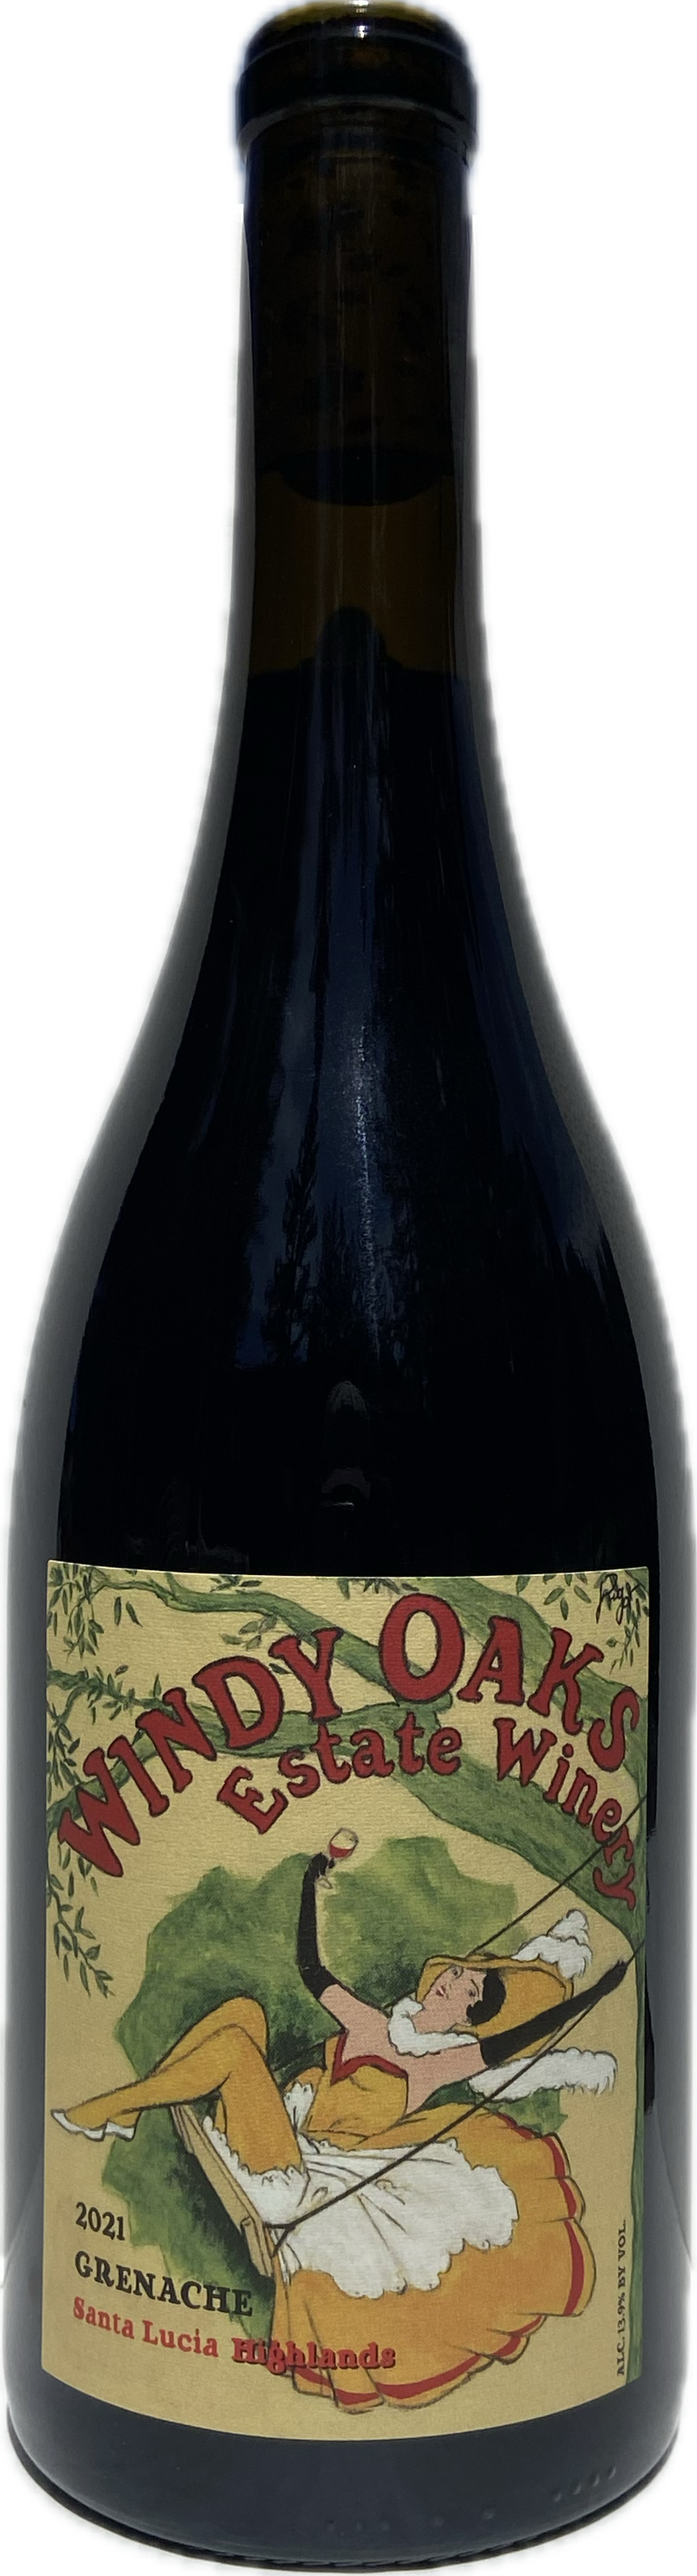 Product Image for 2021 Grenache, Santa Lucia Highlands